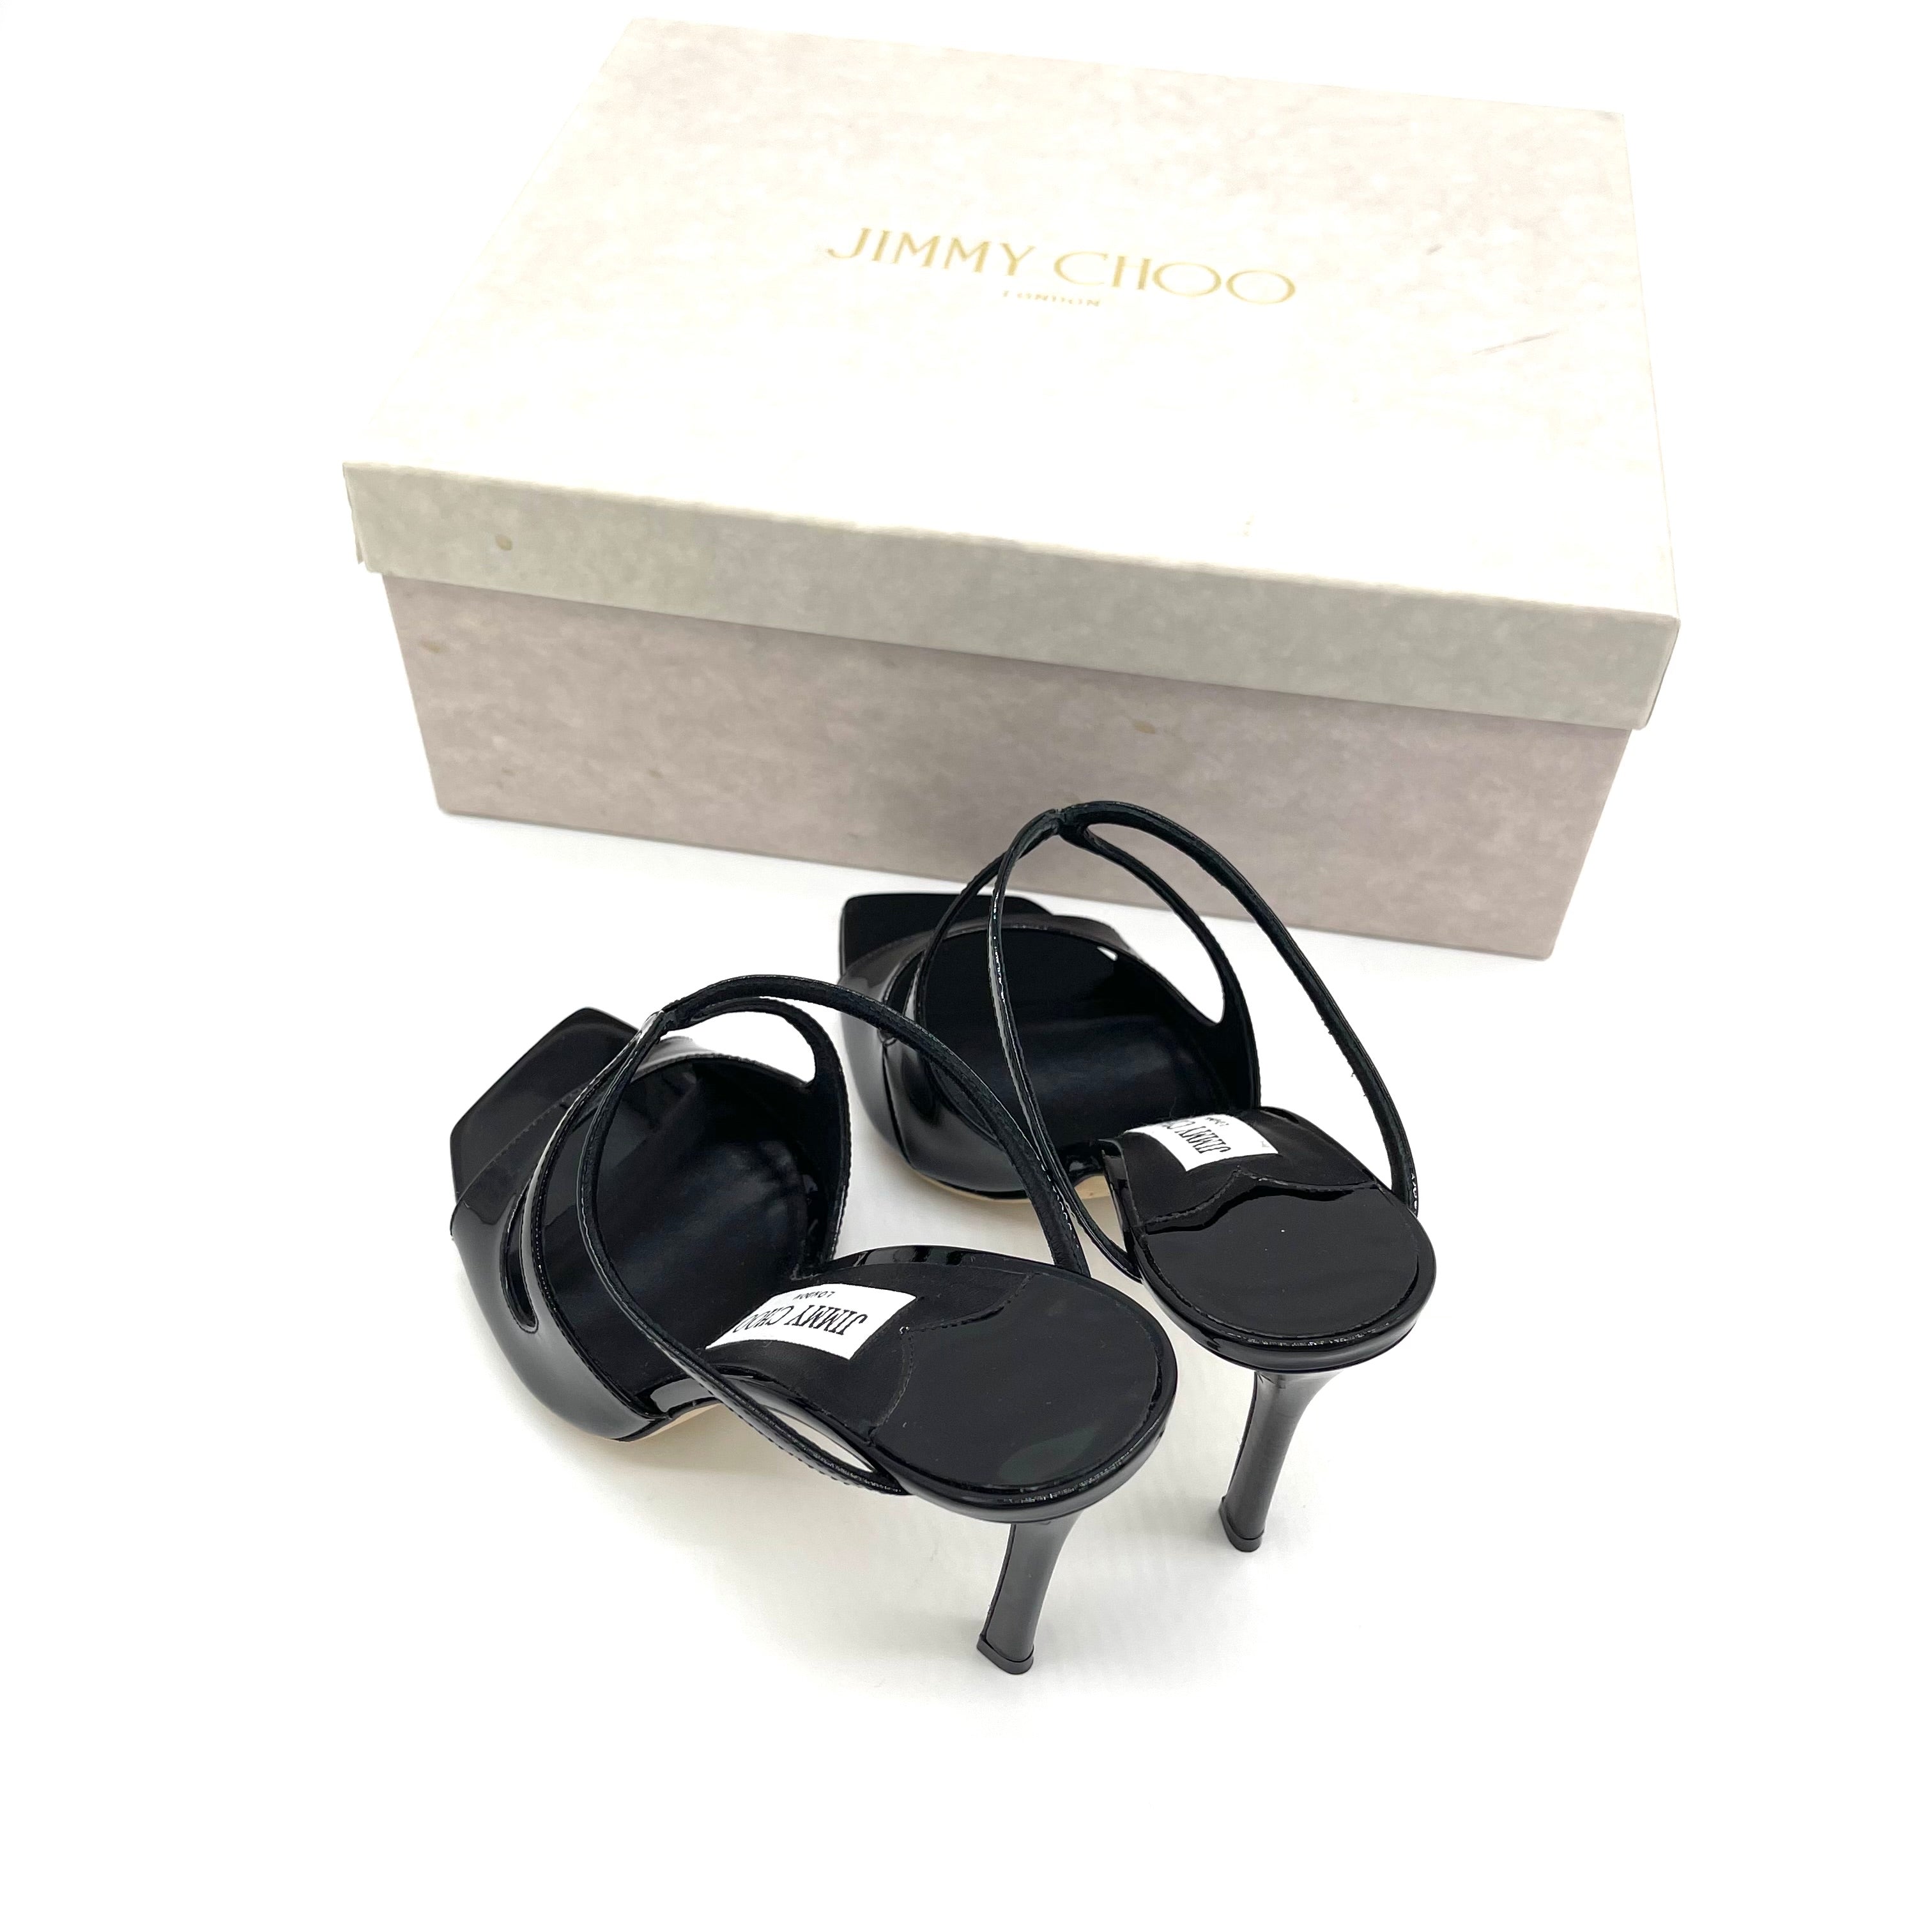 JIMMY CHOO Anise 95 Black Patent Leather Mules 37